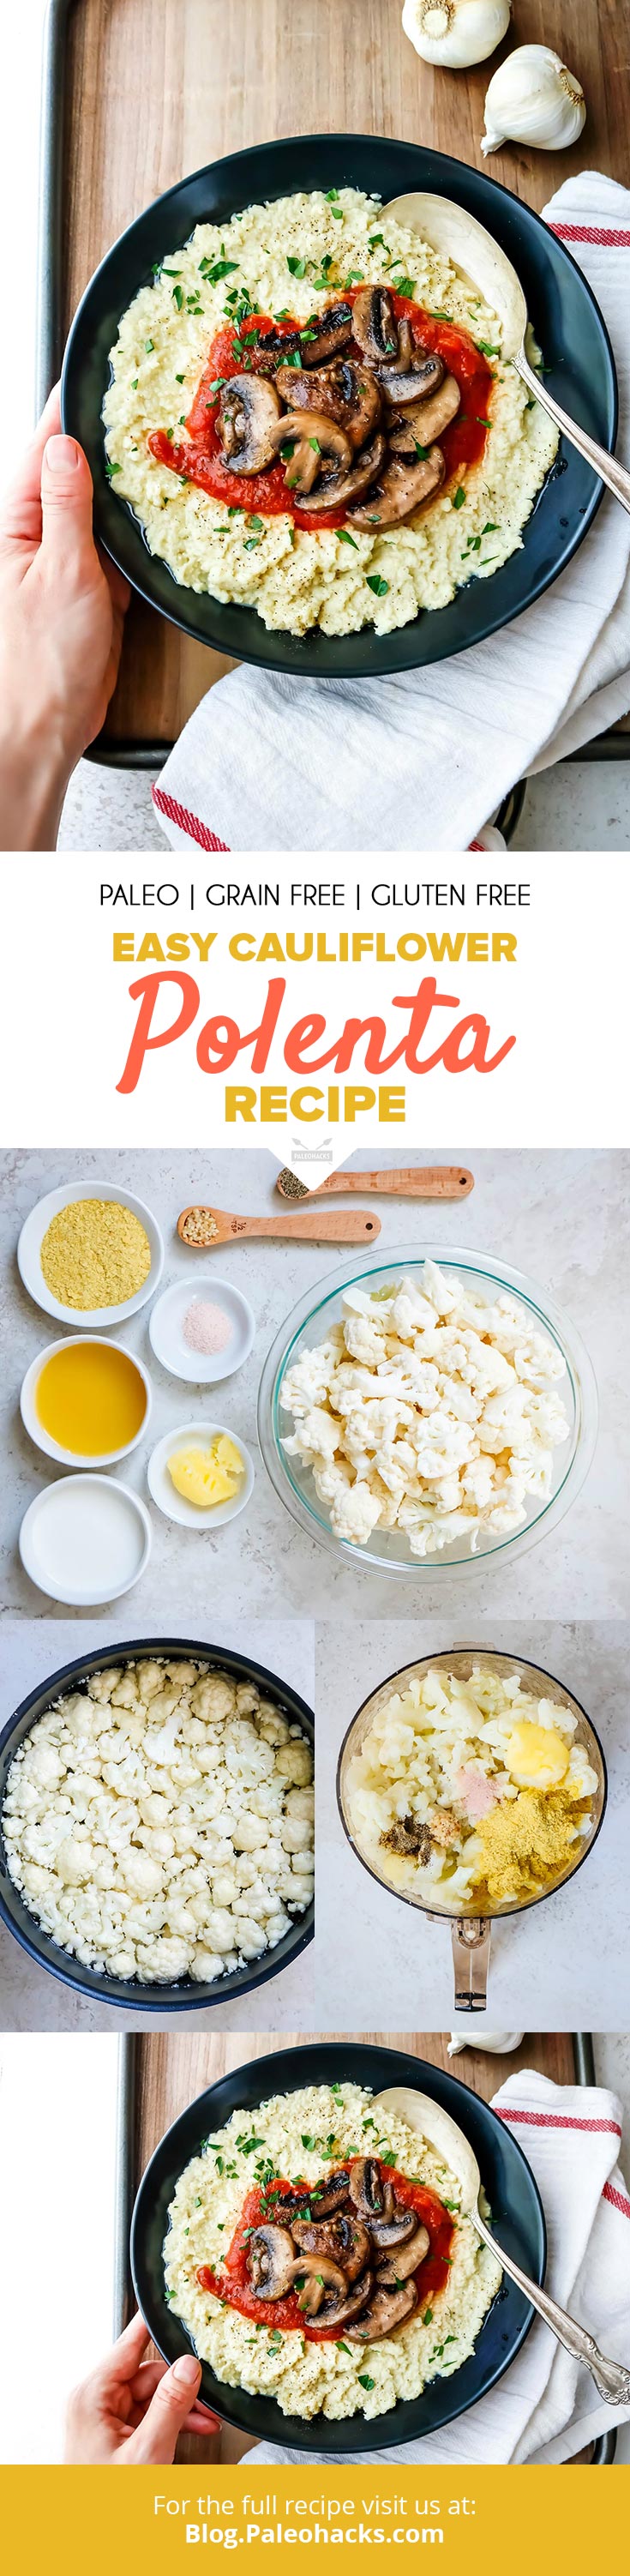 Bring comfort food to a whole new level with this grain-free Cauliflower Polenta. Not too many carbs, not too much work. This porridge is just right.